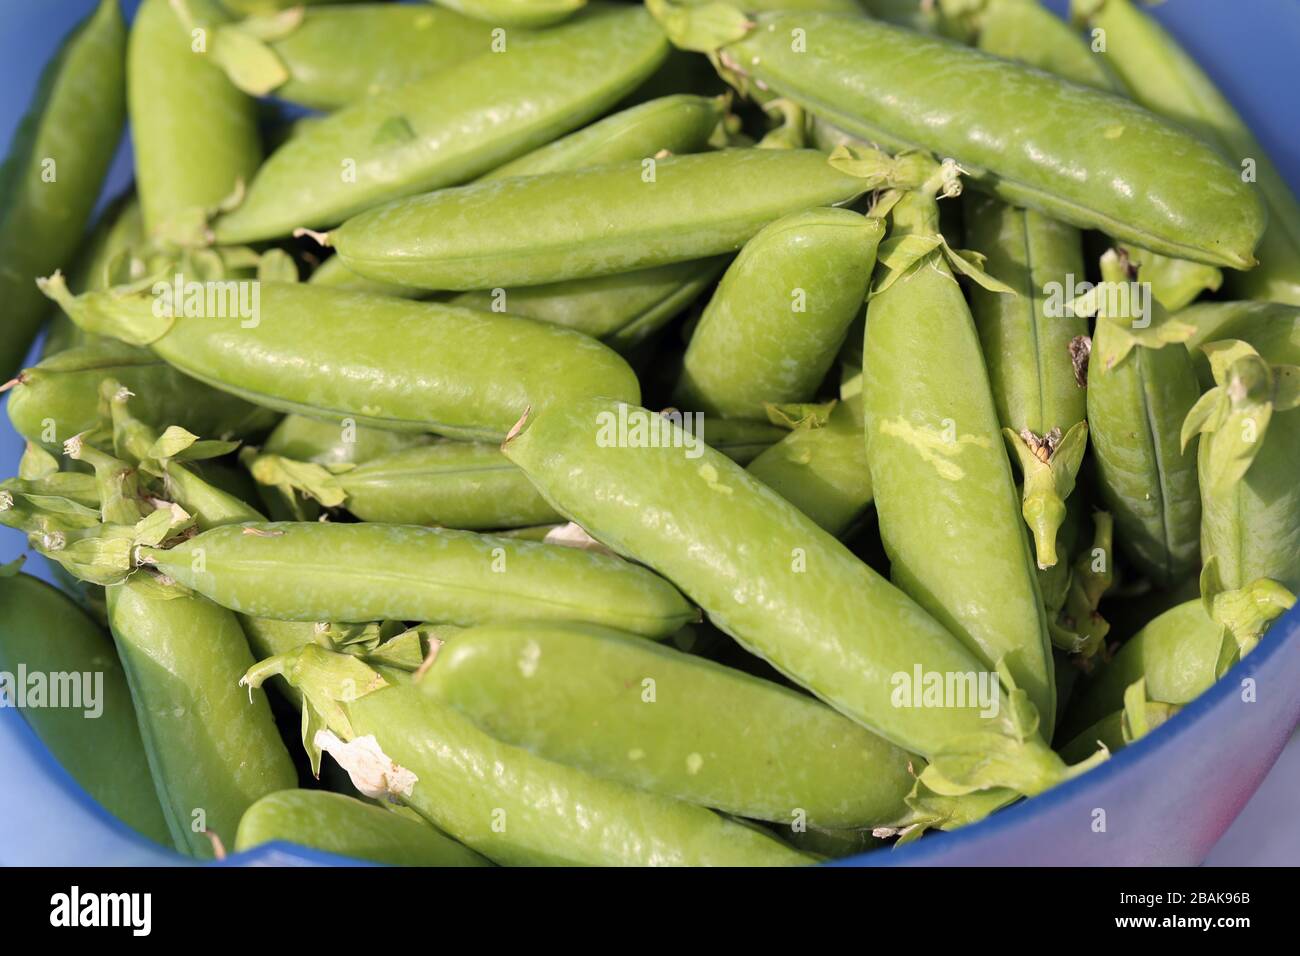 Fresh green peas in their pods in a closeup / macro image. Pea pods are in a blue plastic bowl. Delicious, healthy fresh food straight from garden. Stock Photo